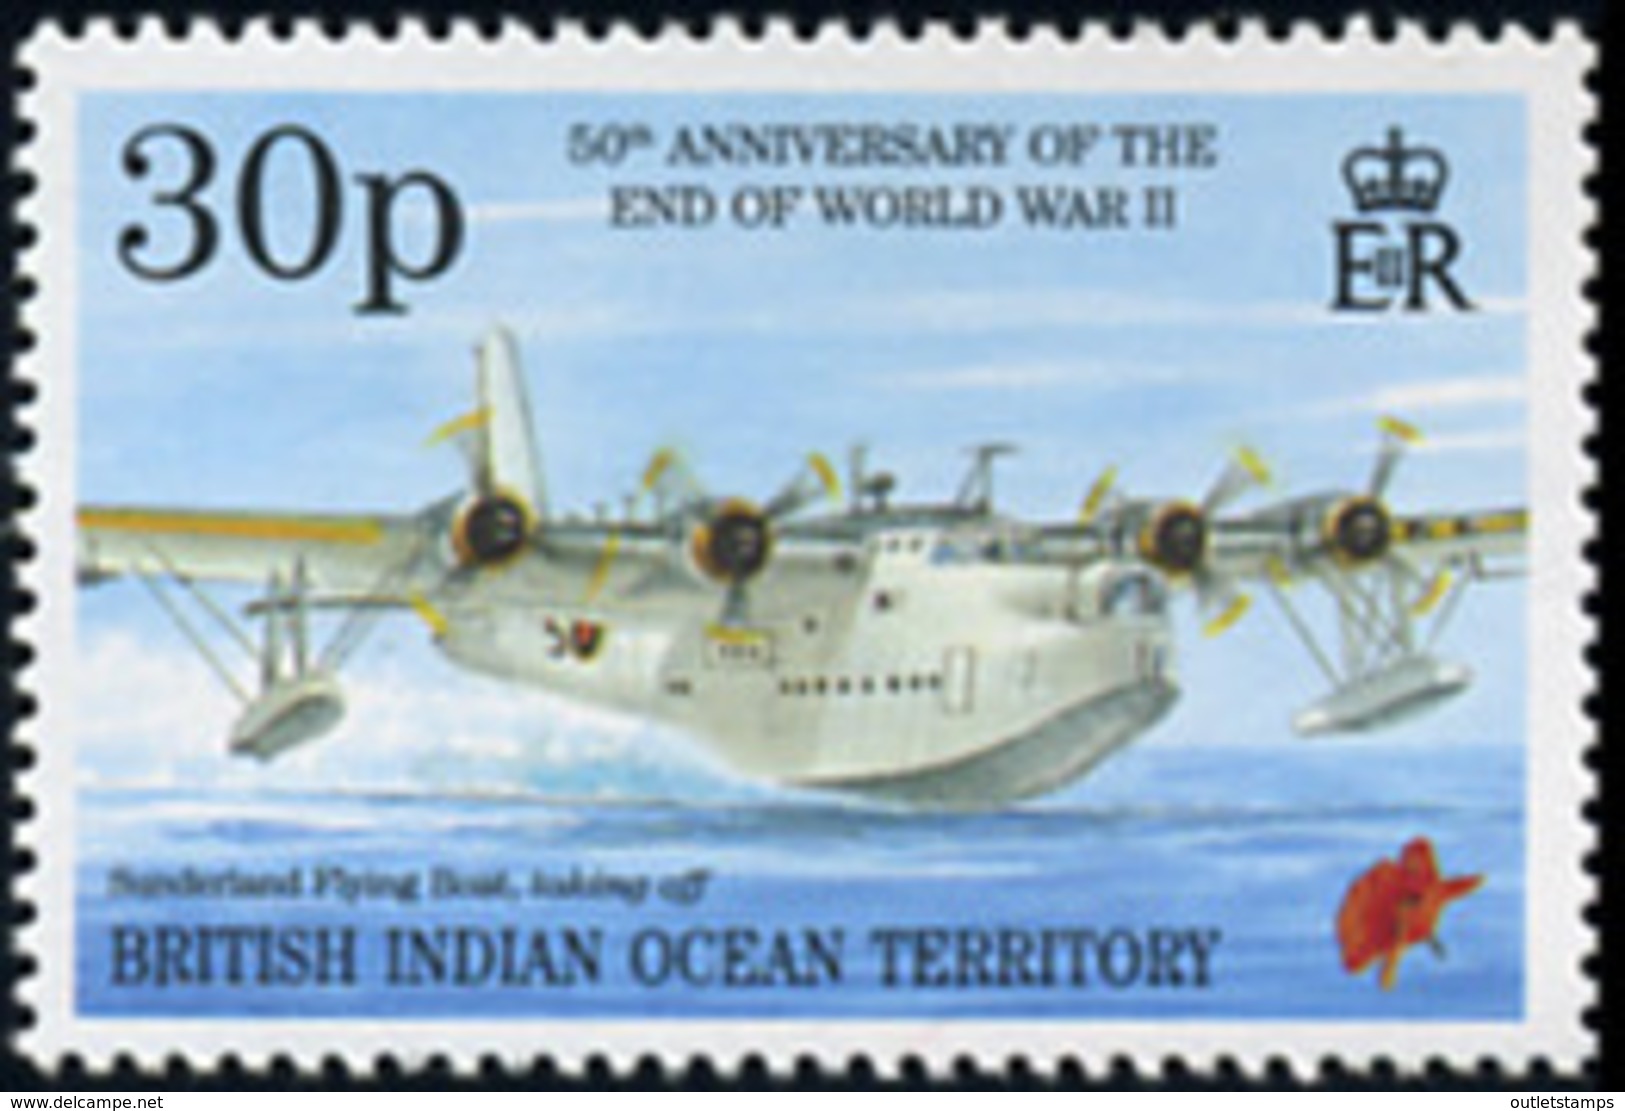 Ref. 599713 * NEW *  - BRITISH INDIAN OCEAN TERRITORY . 1995. 50th ANNIVERSARY OF THE END OF THE SECOND WORLD WAR. 50 AN - British Indian Ocean Territory (BIOT)